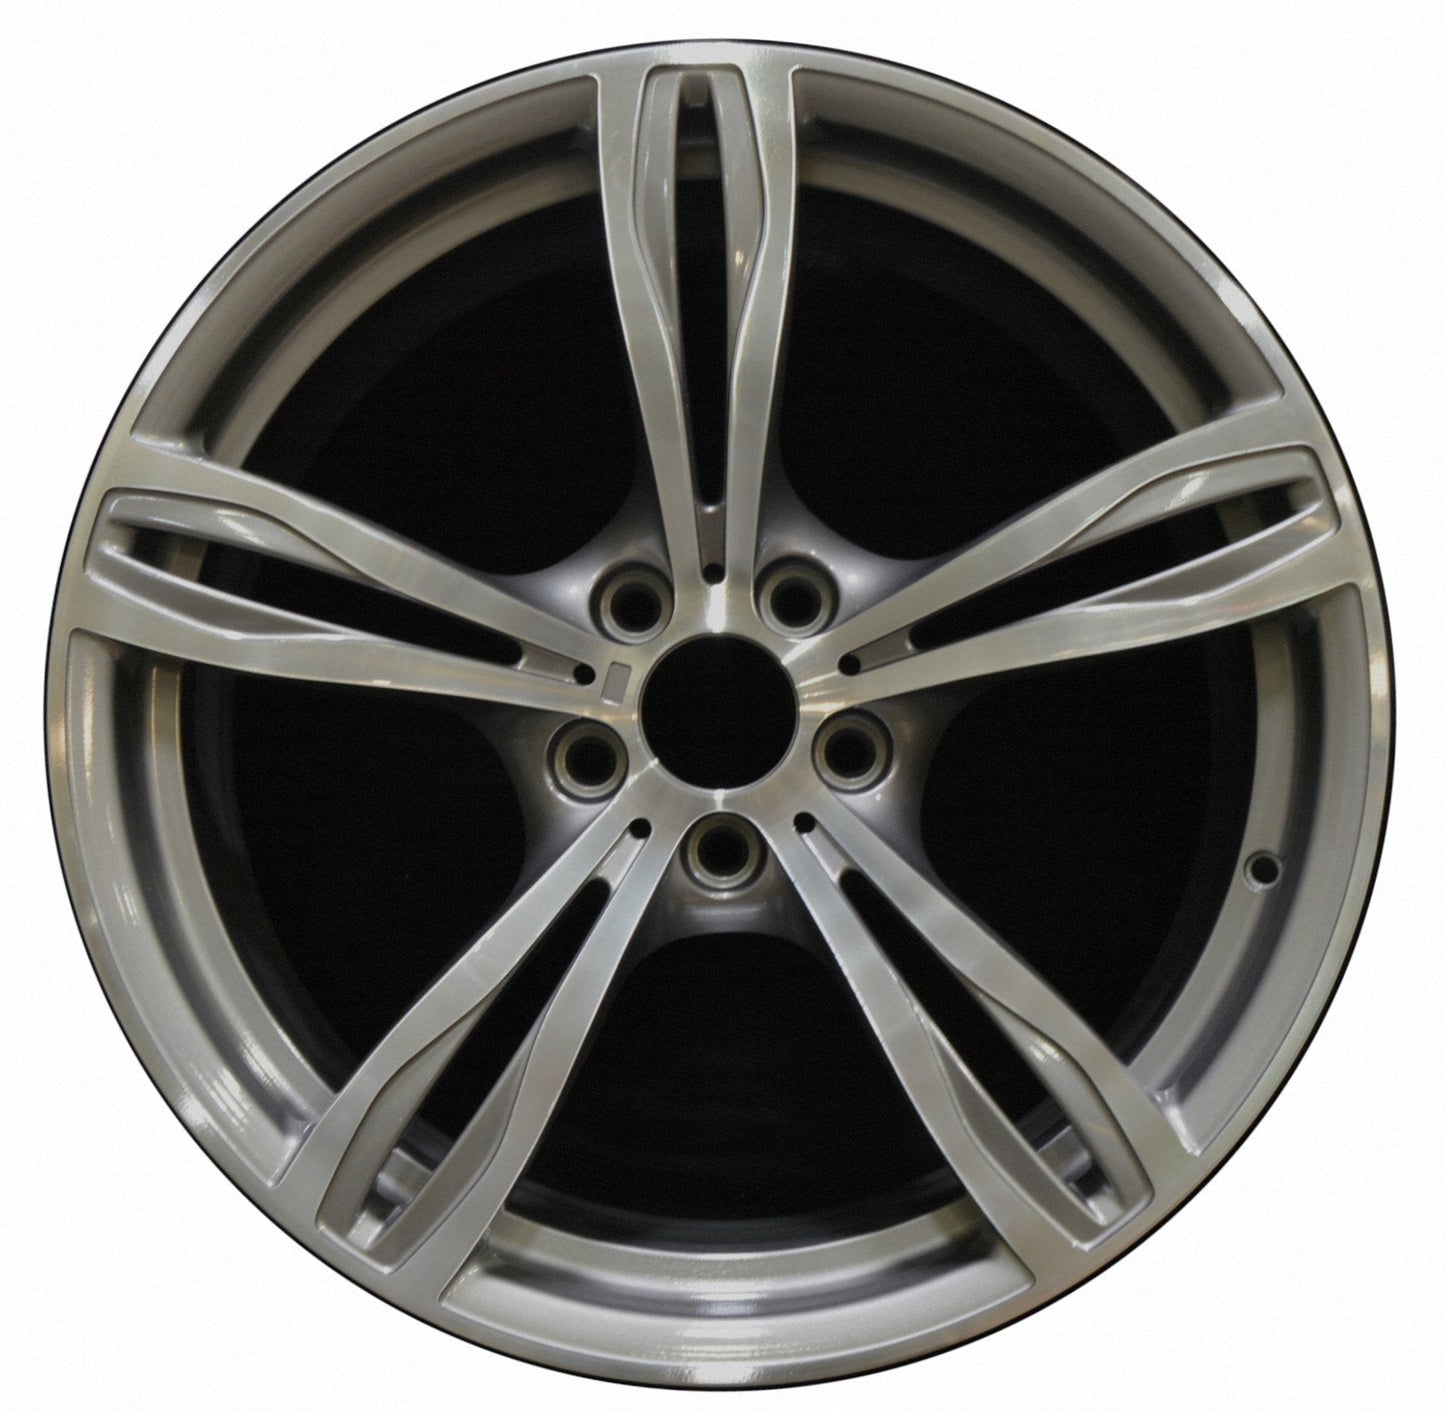 BMW M6  2012, 2013, 2014, 2015, 2016, 2017, 2018 Factory OEM Car Wheel Size 20x9.5 Alloy WAO.71577FT.LC25.MABRT